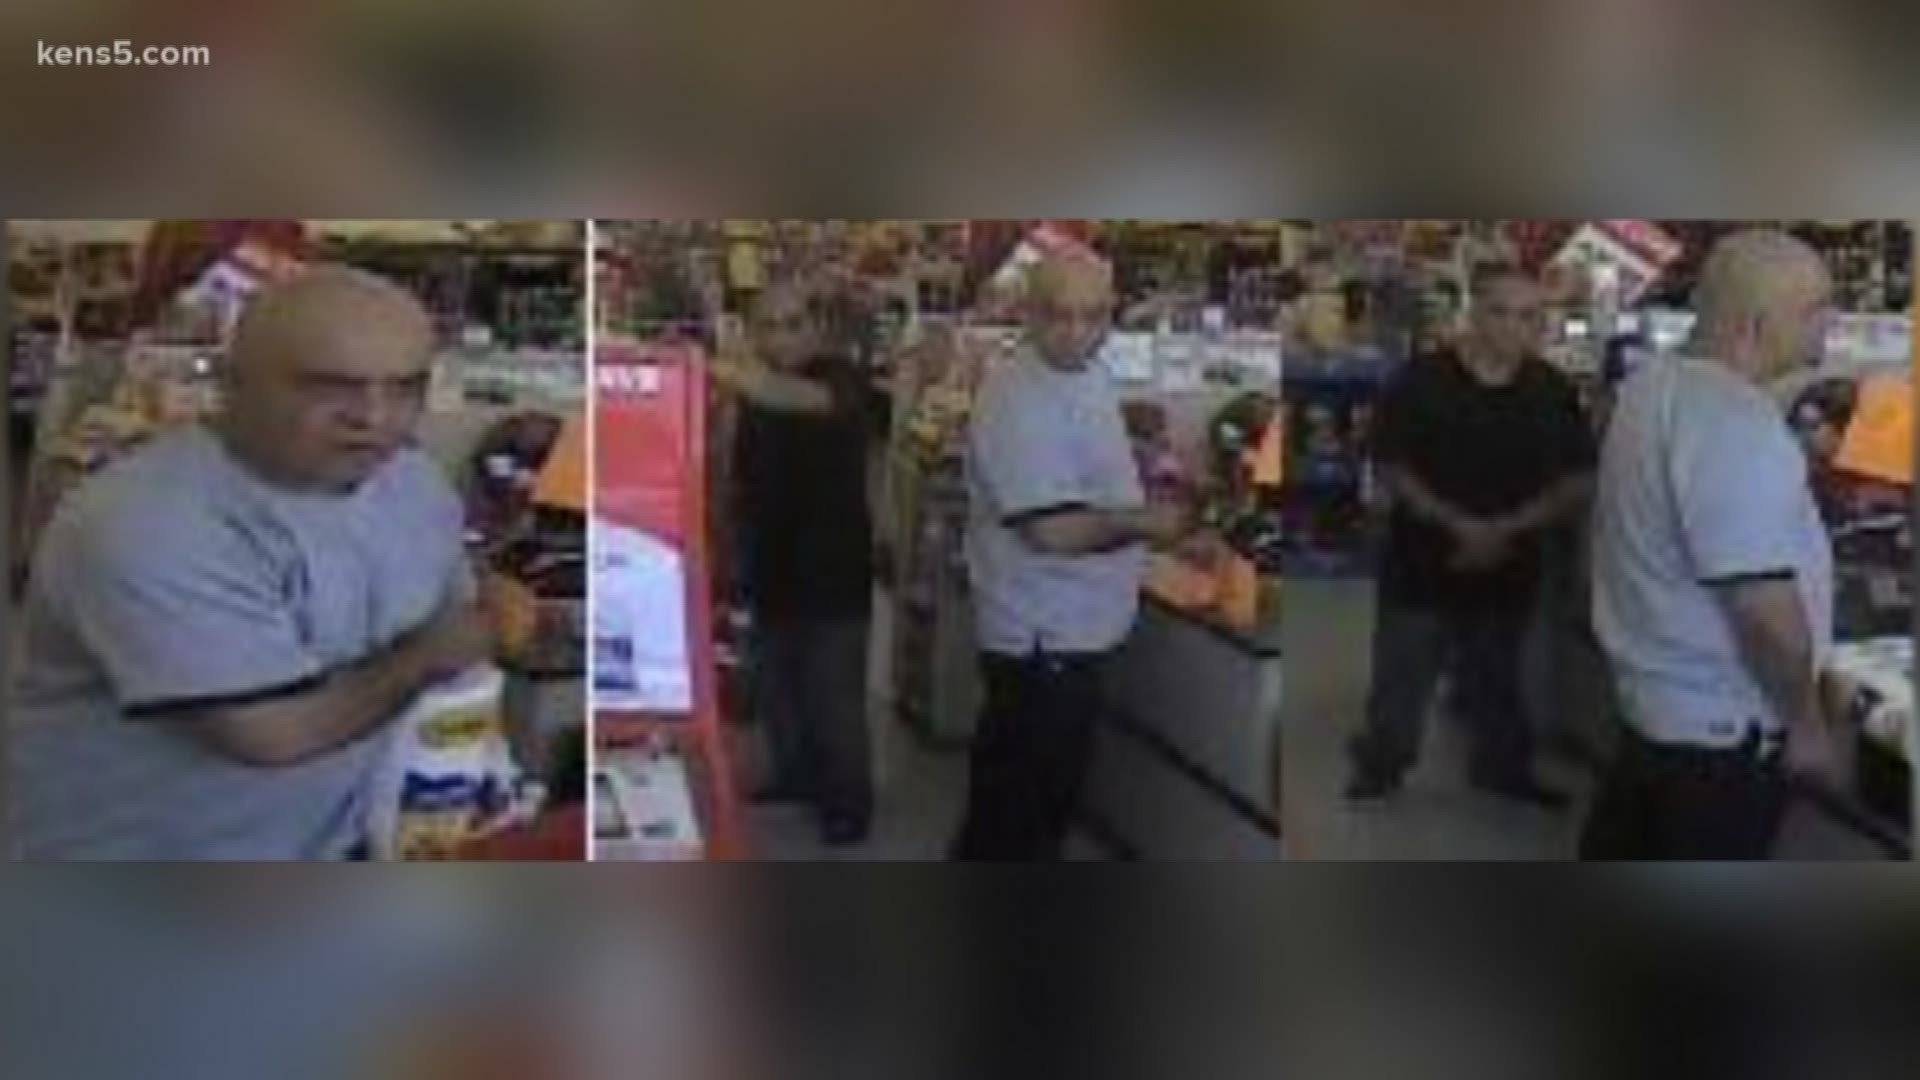 San Antonio Police need your help in catching the suspects seen in the above video. You can call Crime Stoppers 210-224-STOP if you have any information.